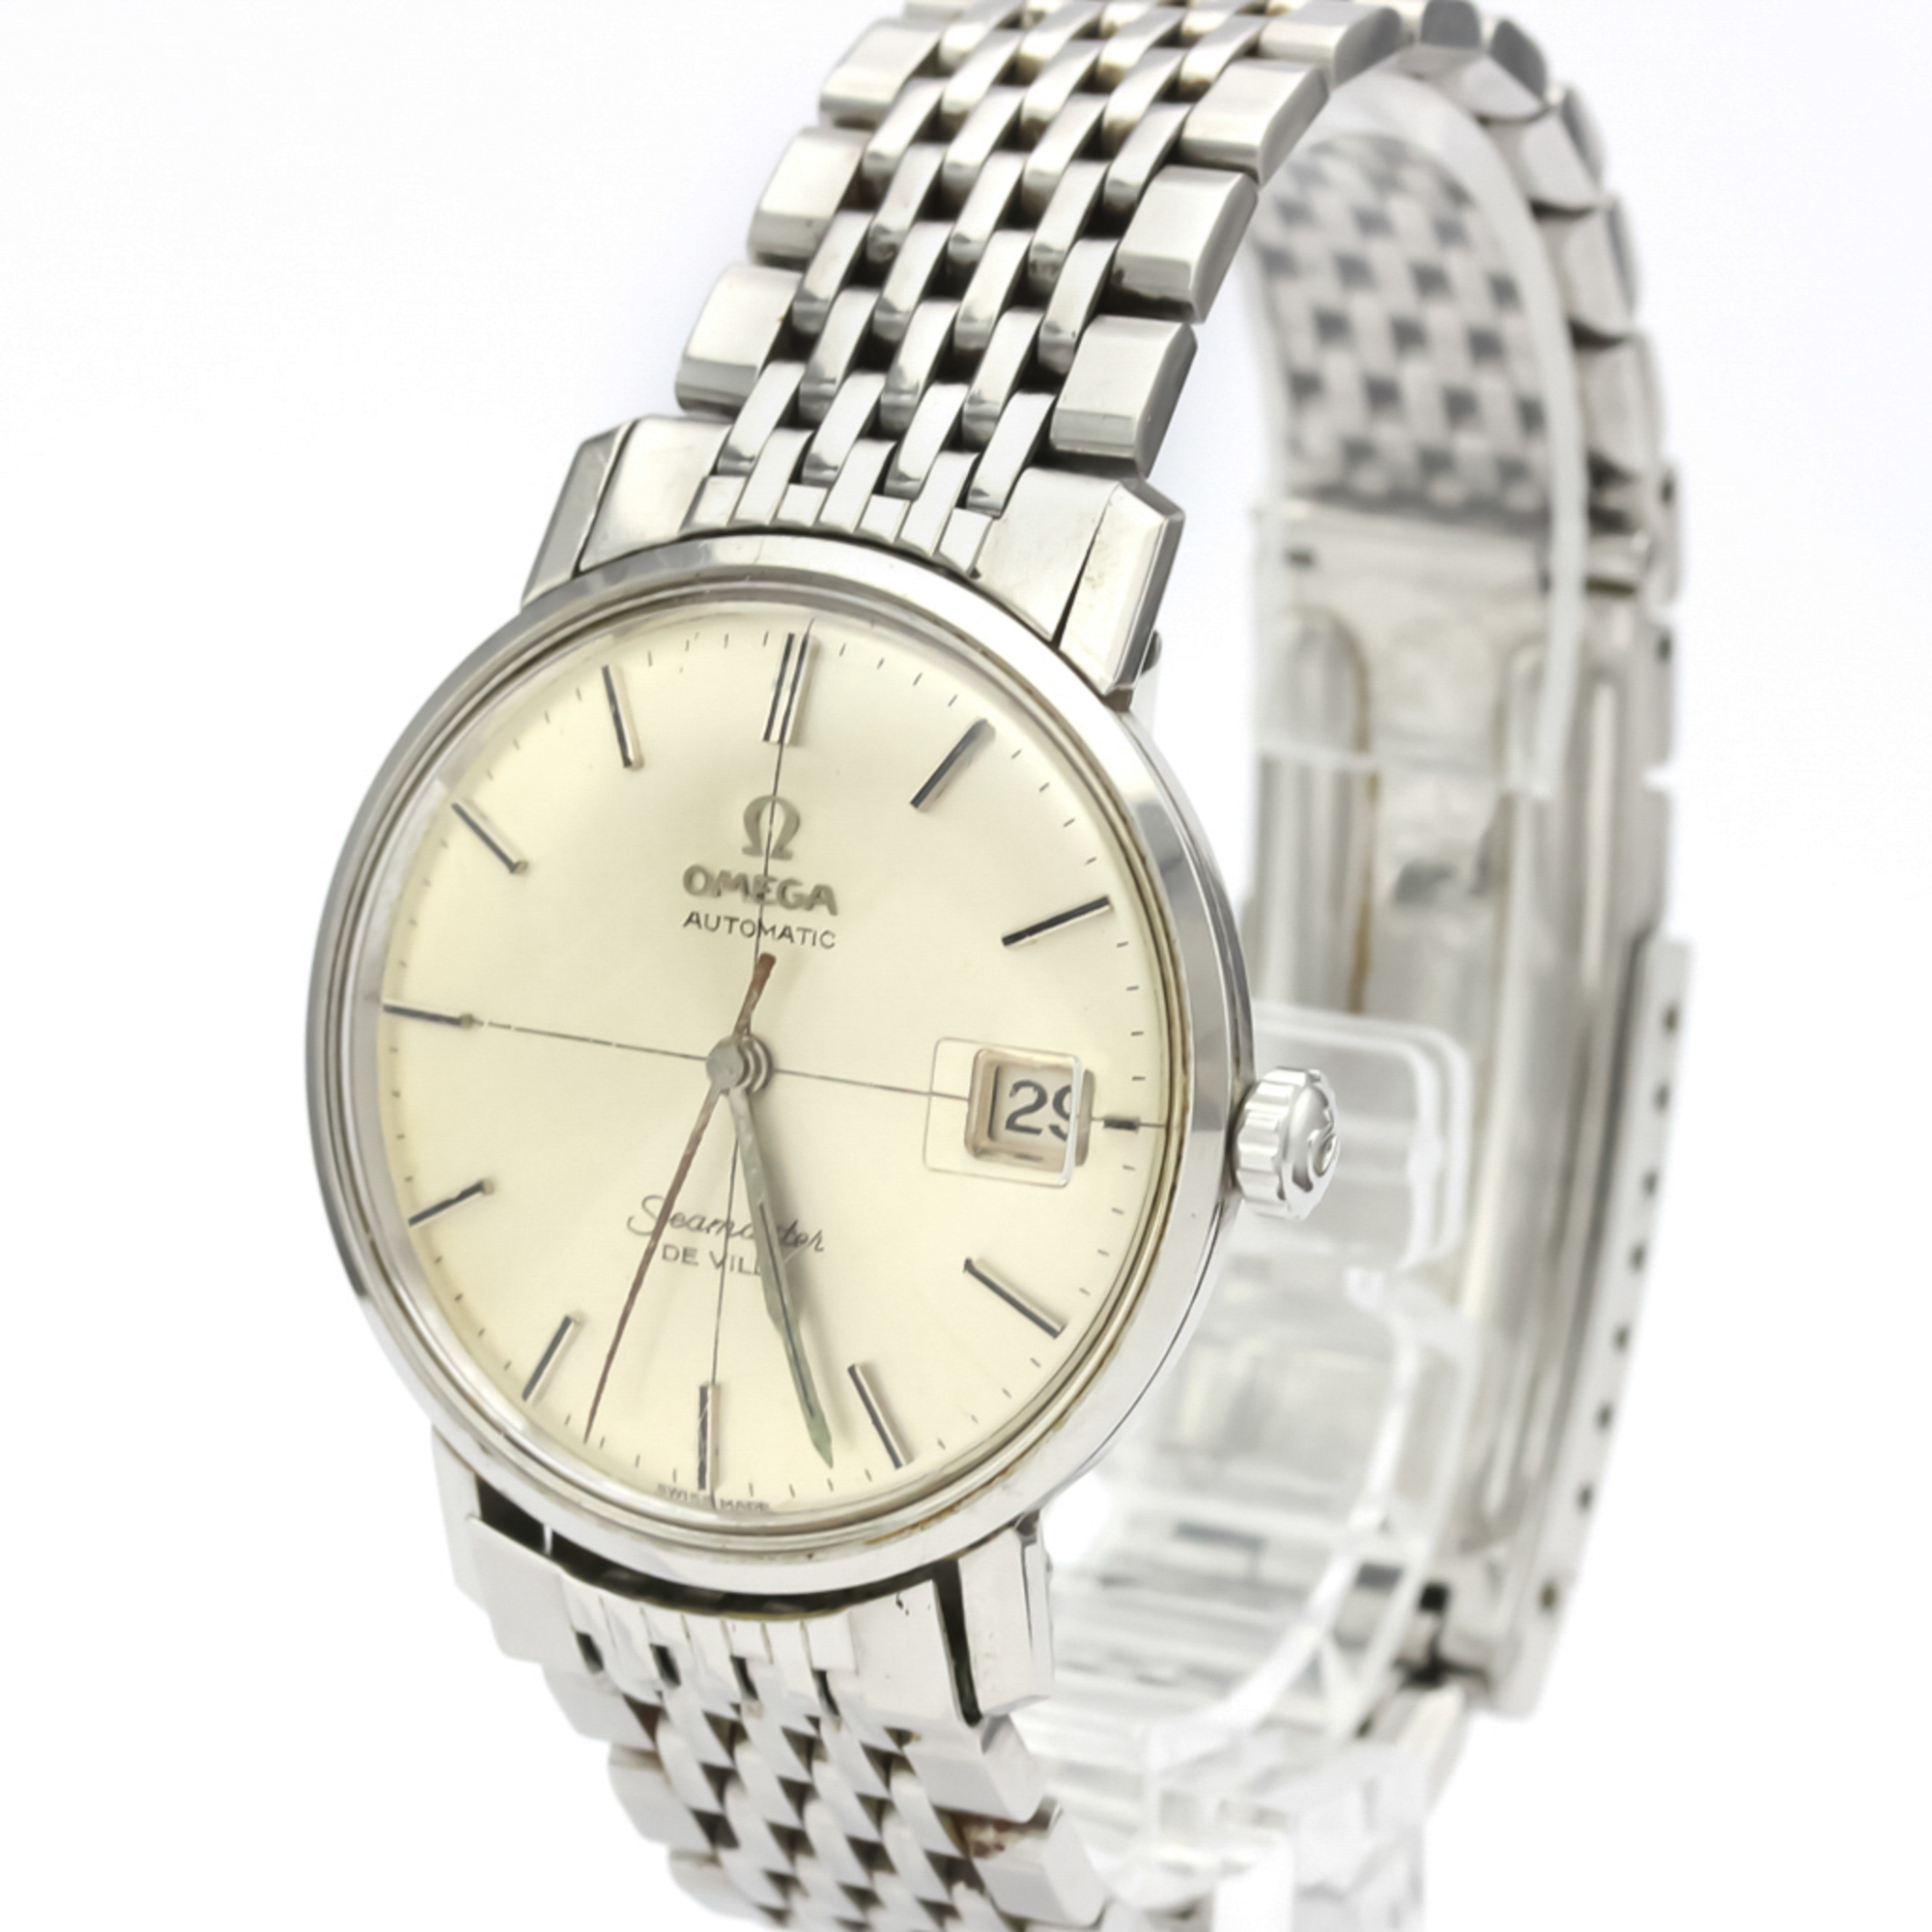 Omega Seamaster Automatic Stainless Steel Men's Dress Watch